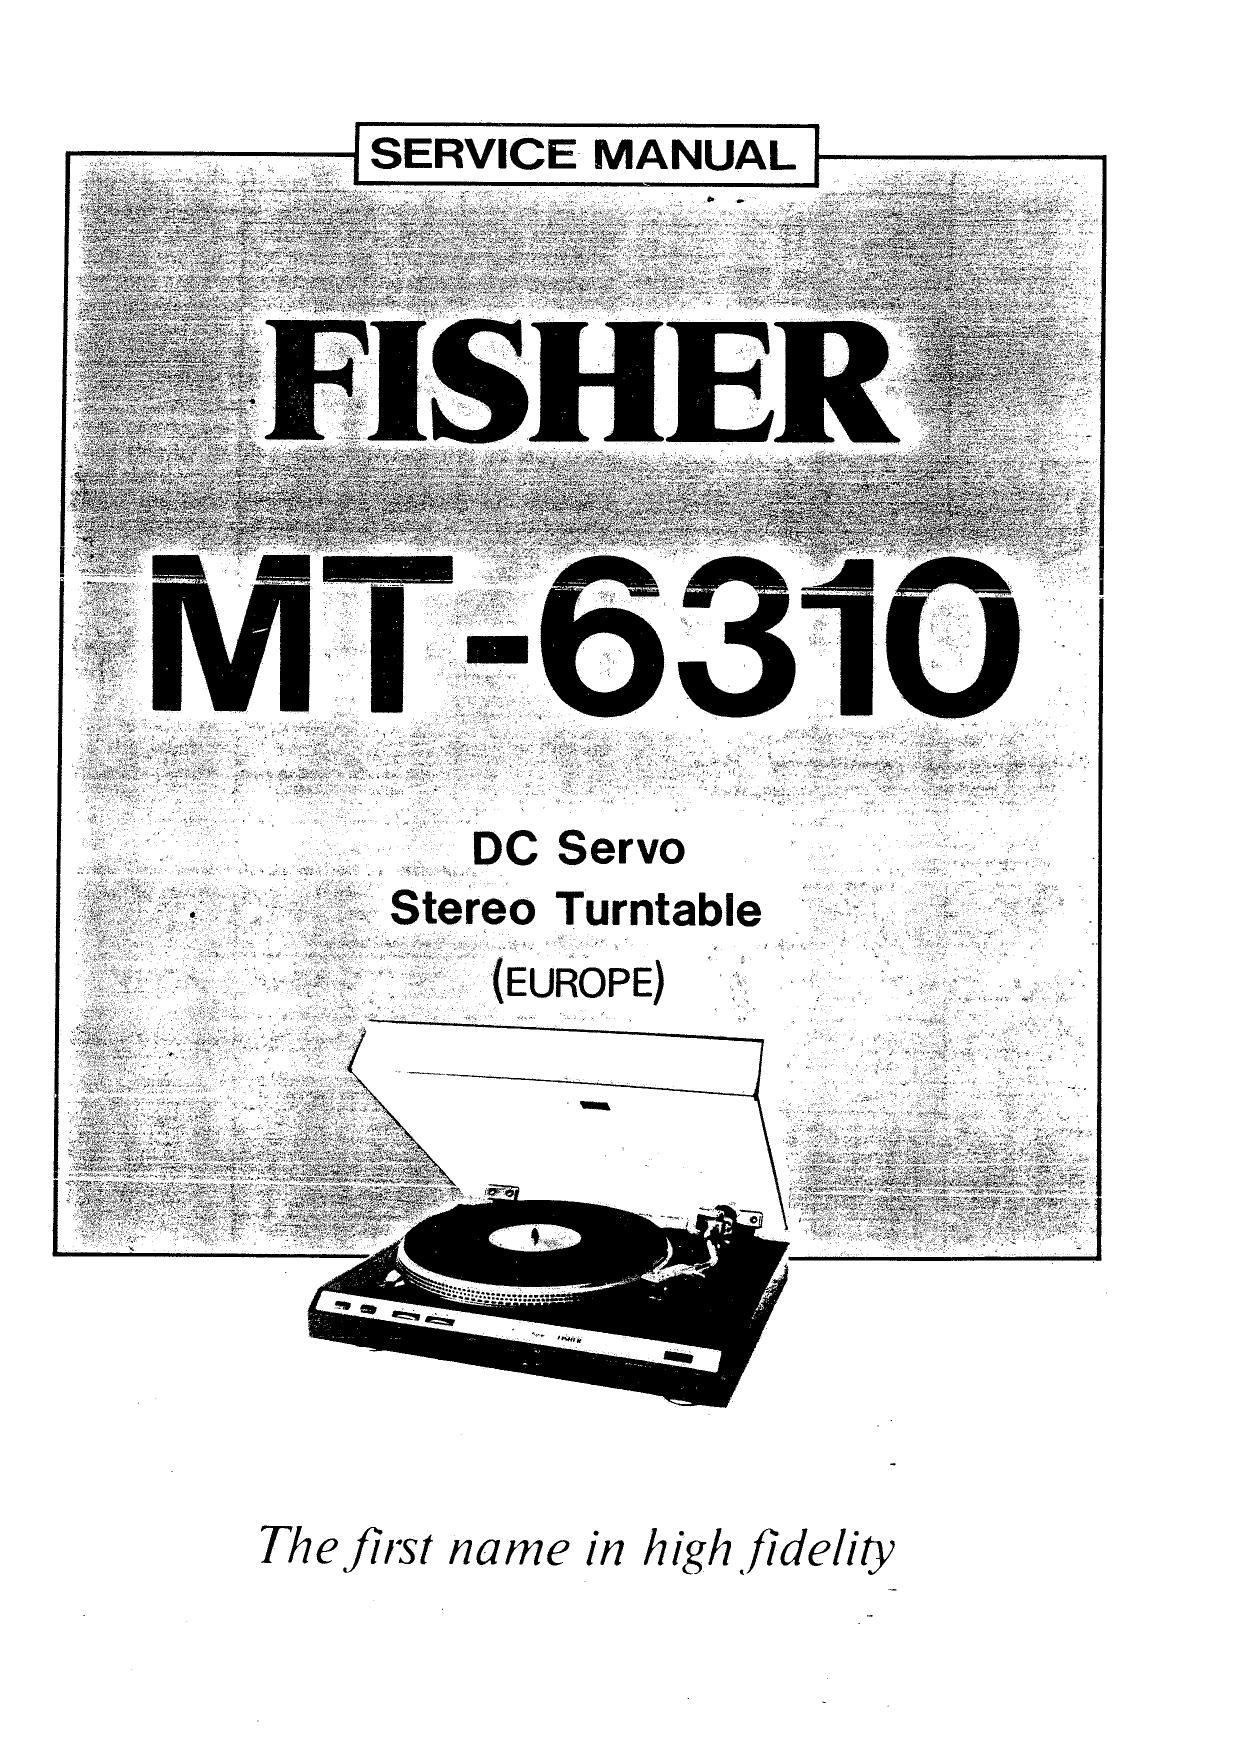 Fisher MT 6310 Service Manual